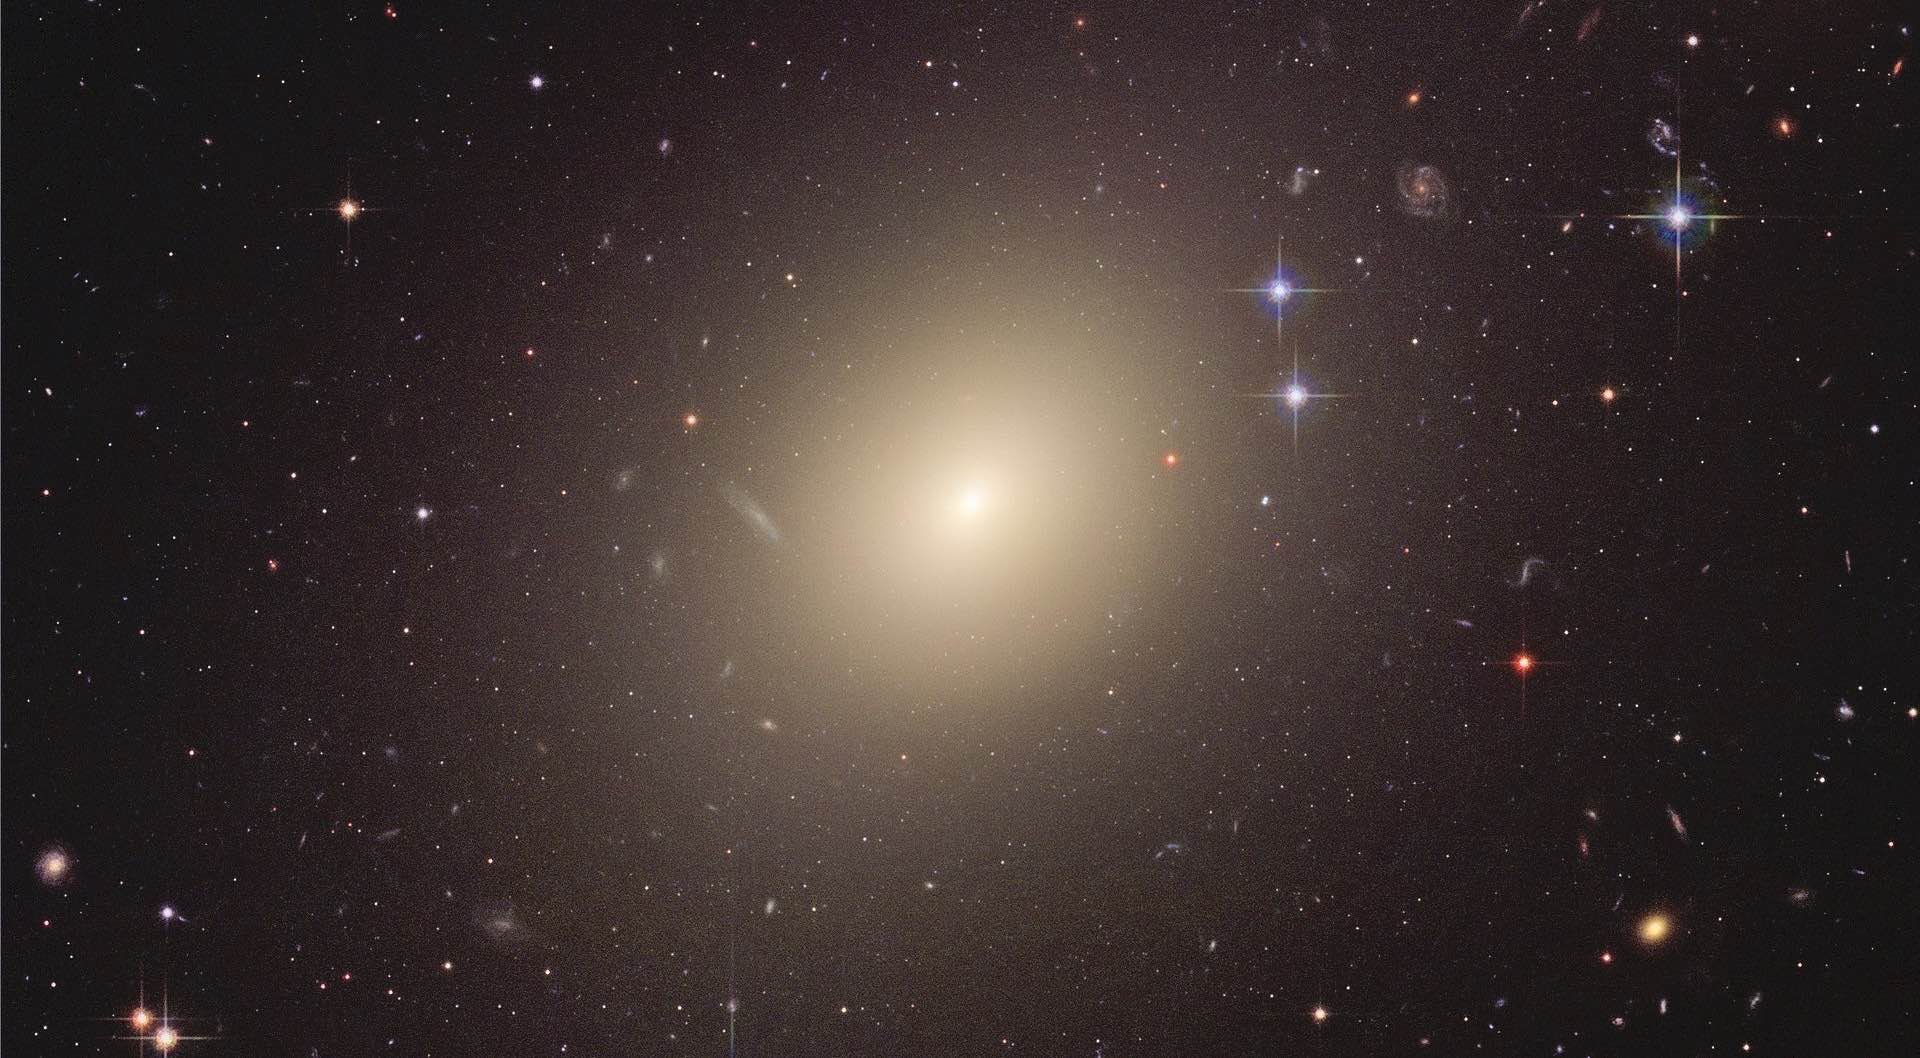 The giant elliptical galaxy ESO 325-G004. Like most other elliptical galaxies, ESO 325-G004 has virtually ceased forming new stars, so that only the old, orange/reddish stars are left, giving the elliptical galaxies their characteristic color (credit: NASA, ESA, and The Hubble Heritage Team).